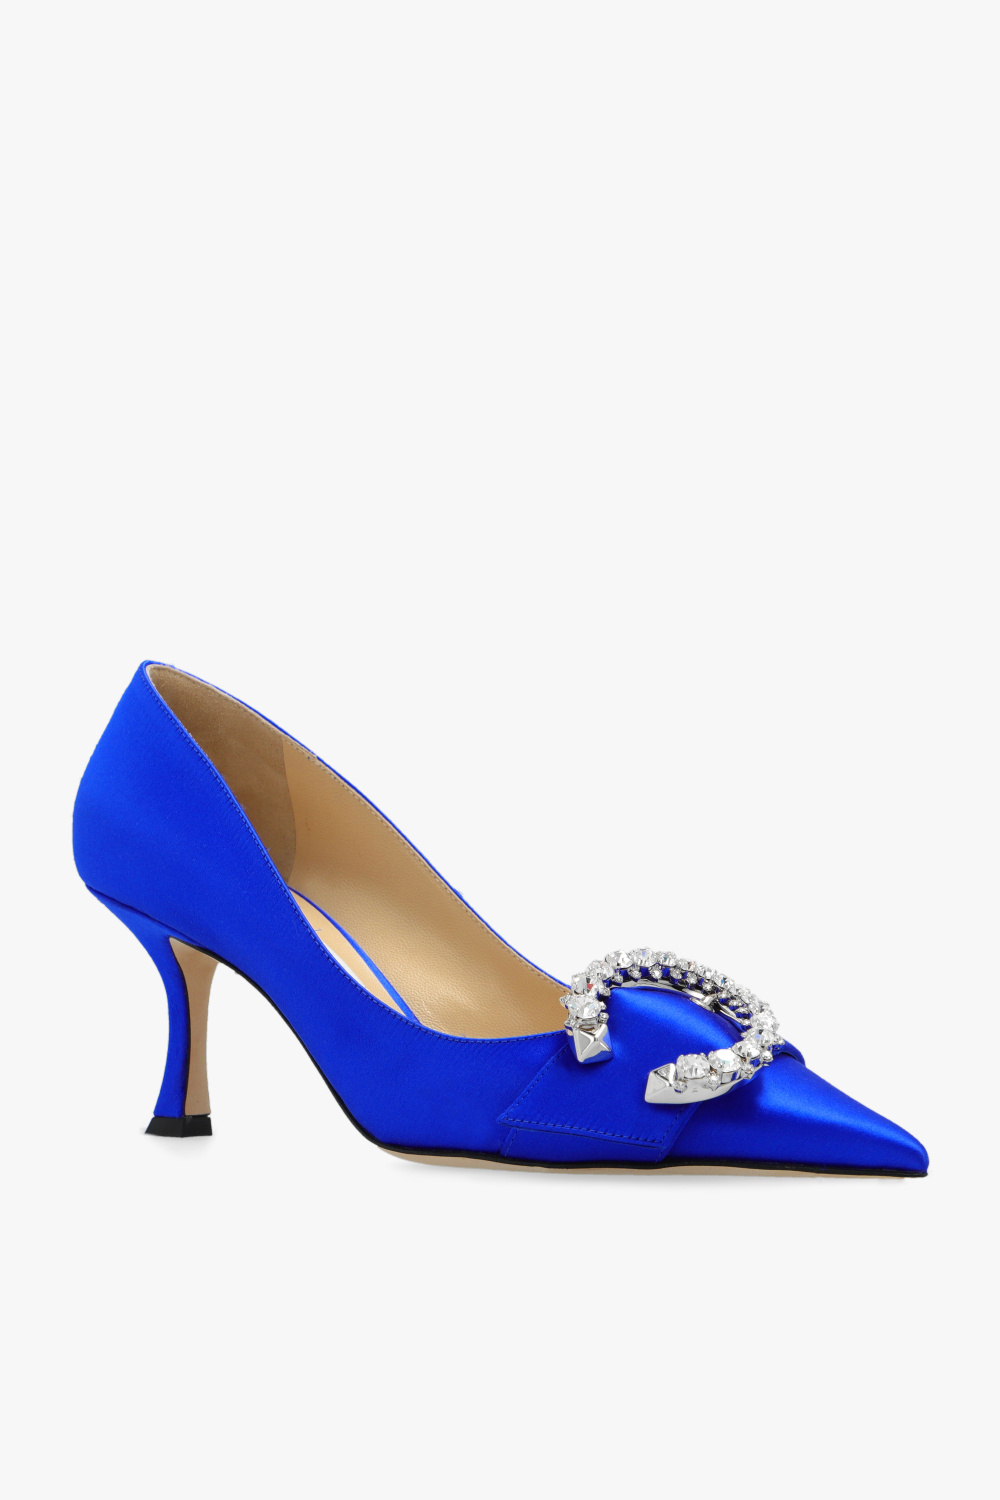 Every Chic Royal Has A Favourite Jimmy Choo Heel